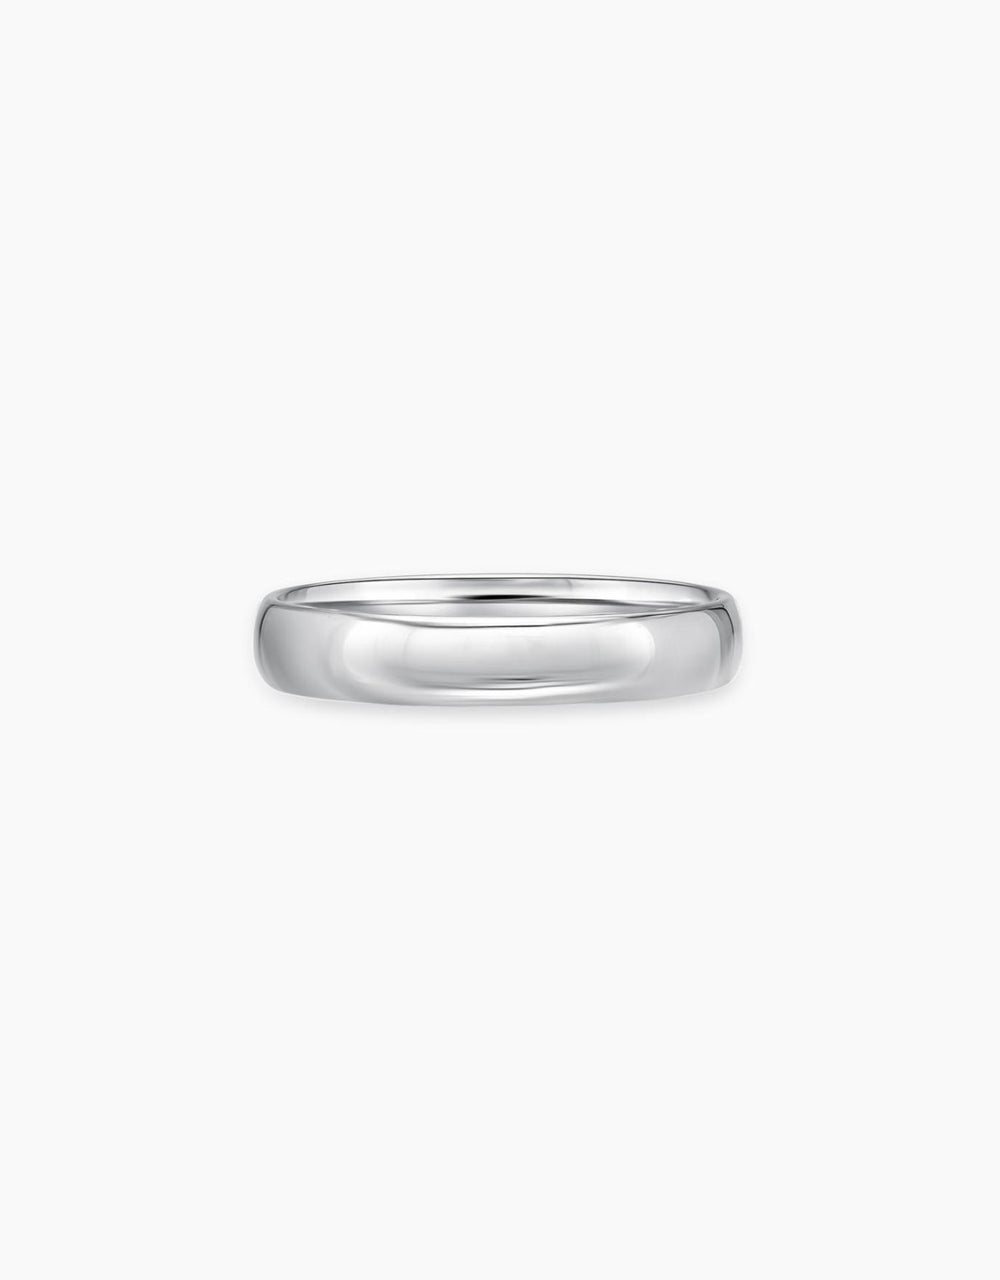 Louis Vuitton Eternite´ wedding band in white gold and